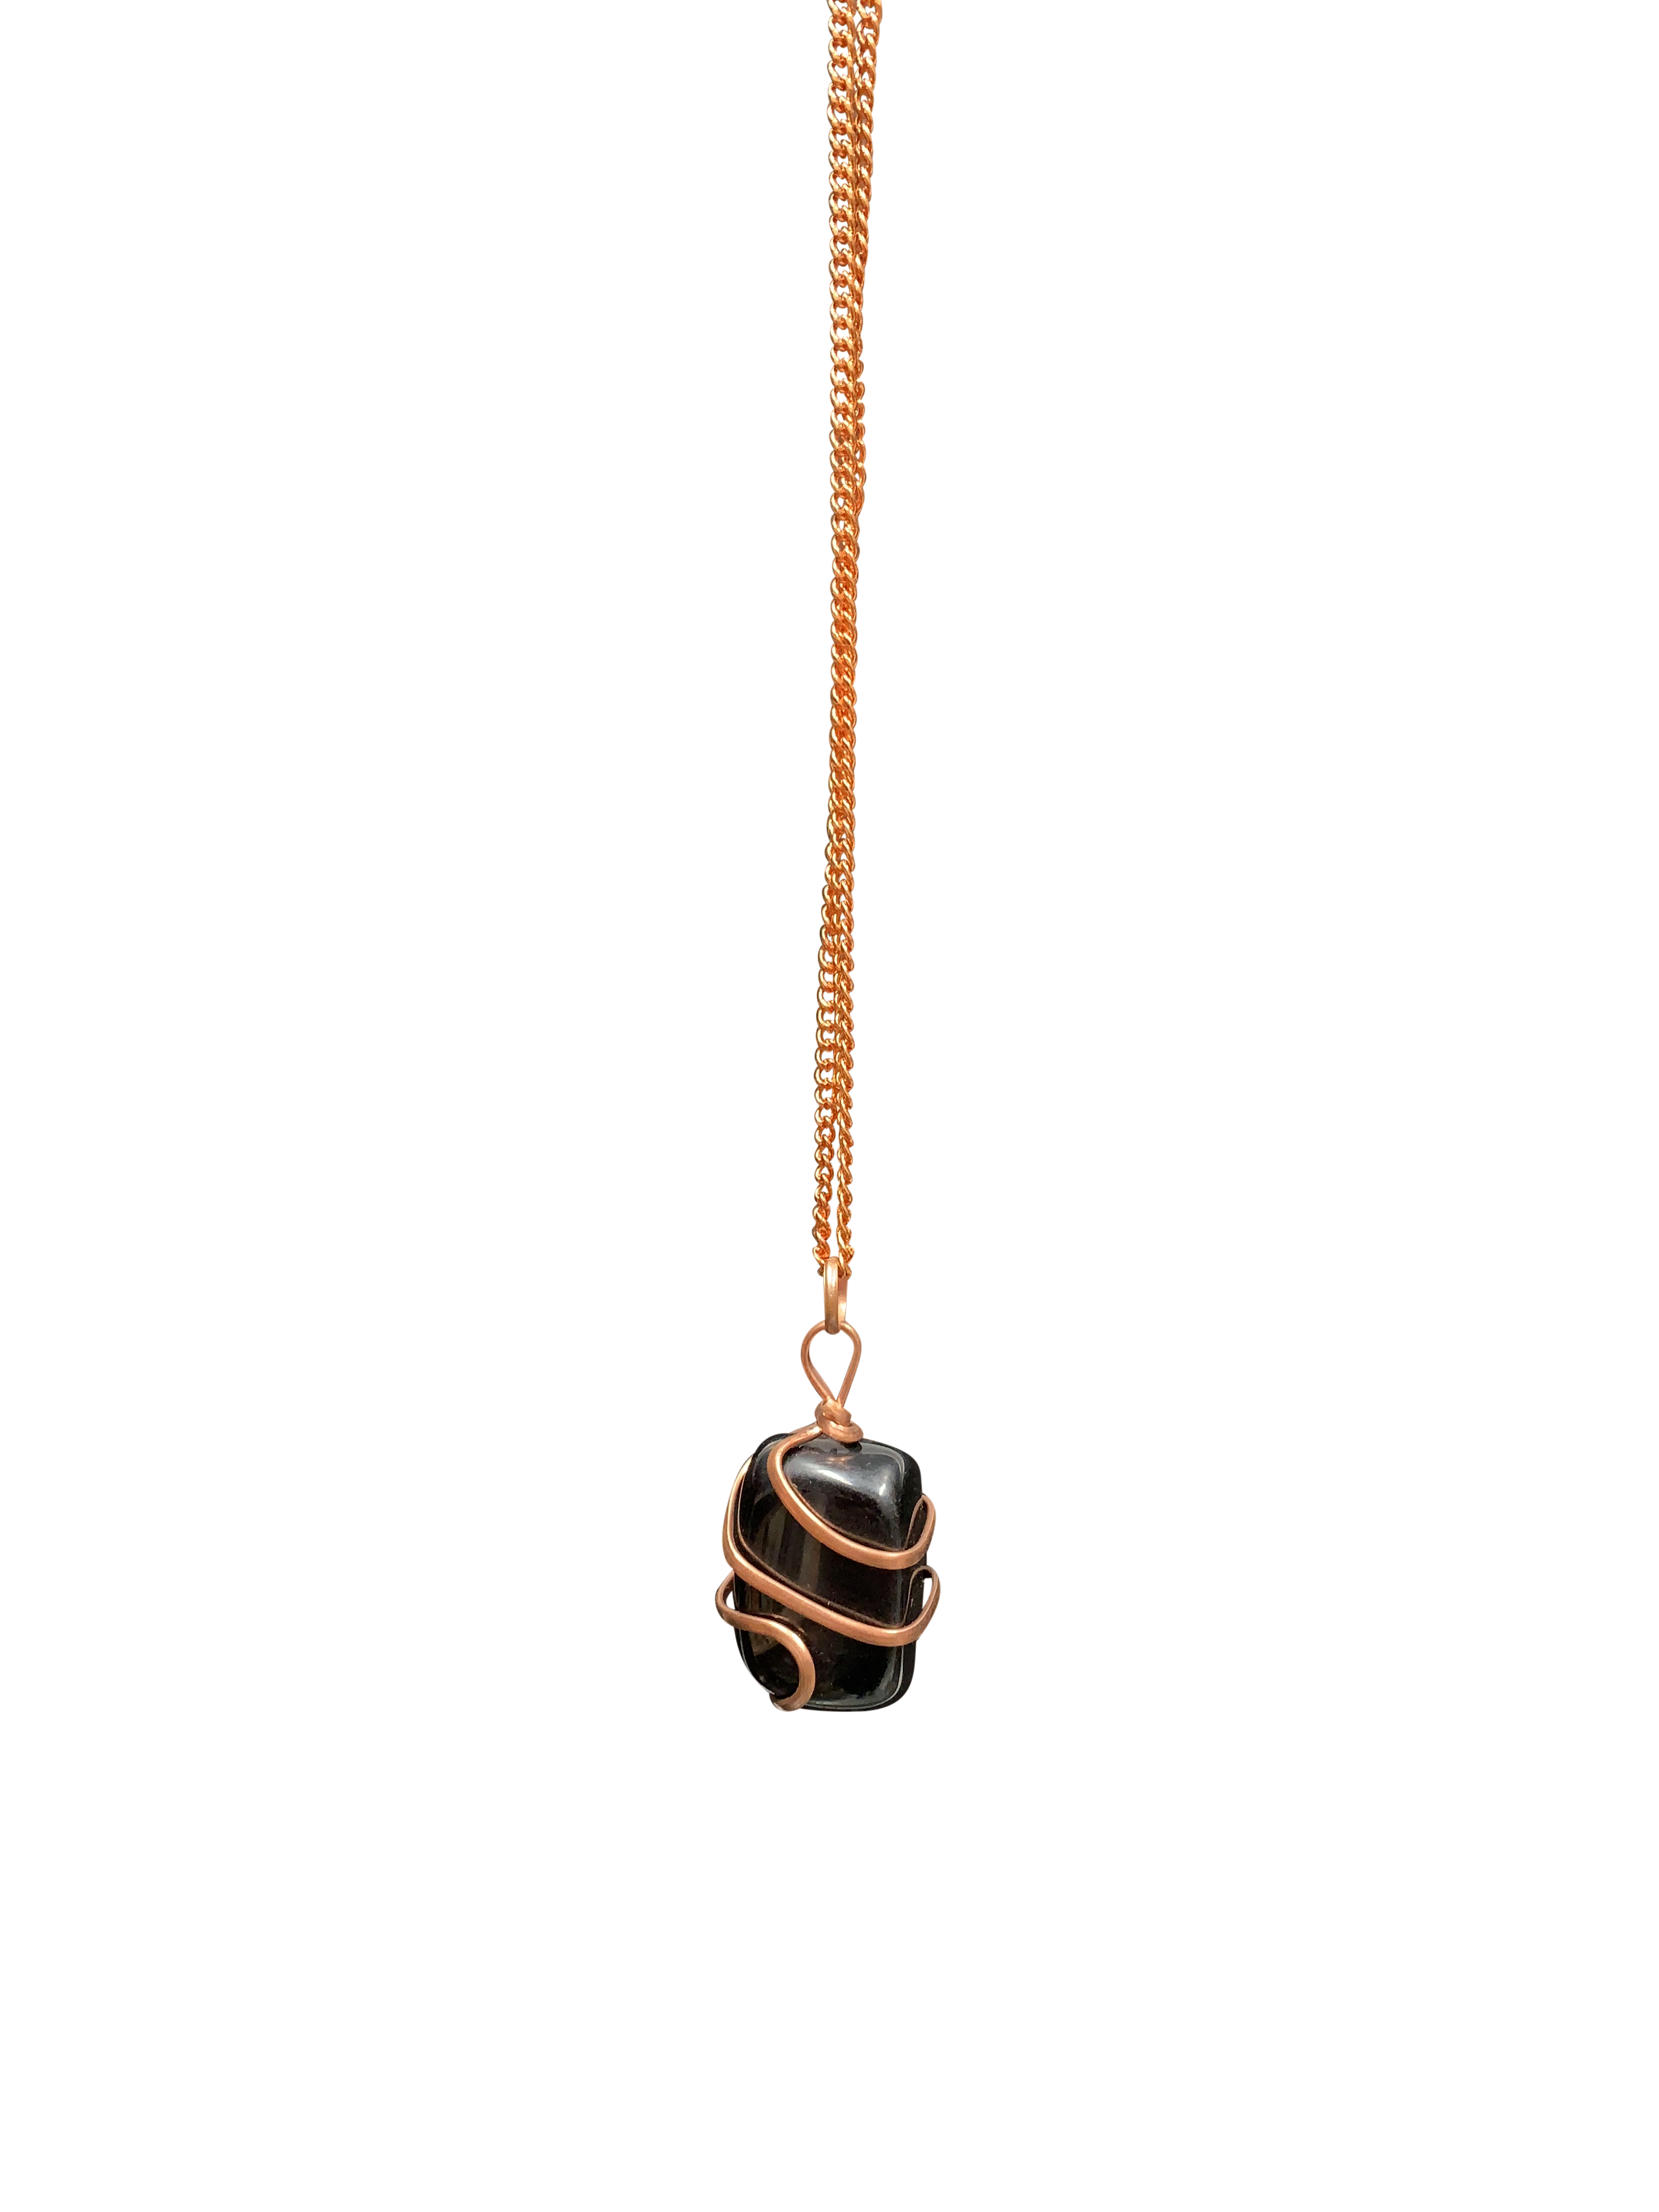 Infinity Loop Crystal Tumbled Collection Black Onyx Pendant Copper